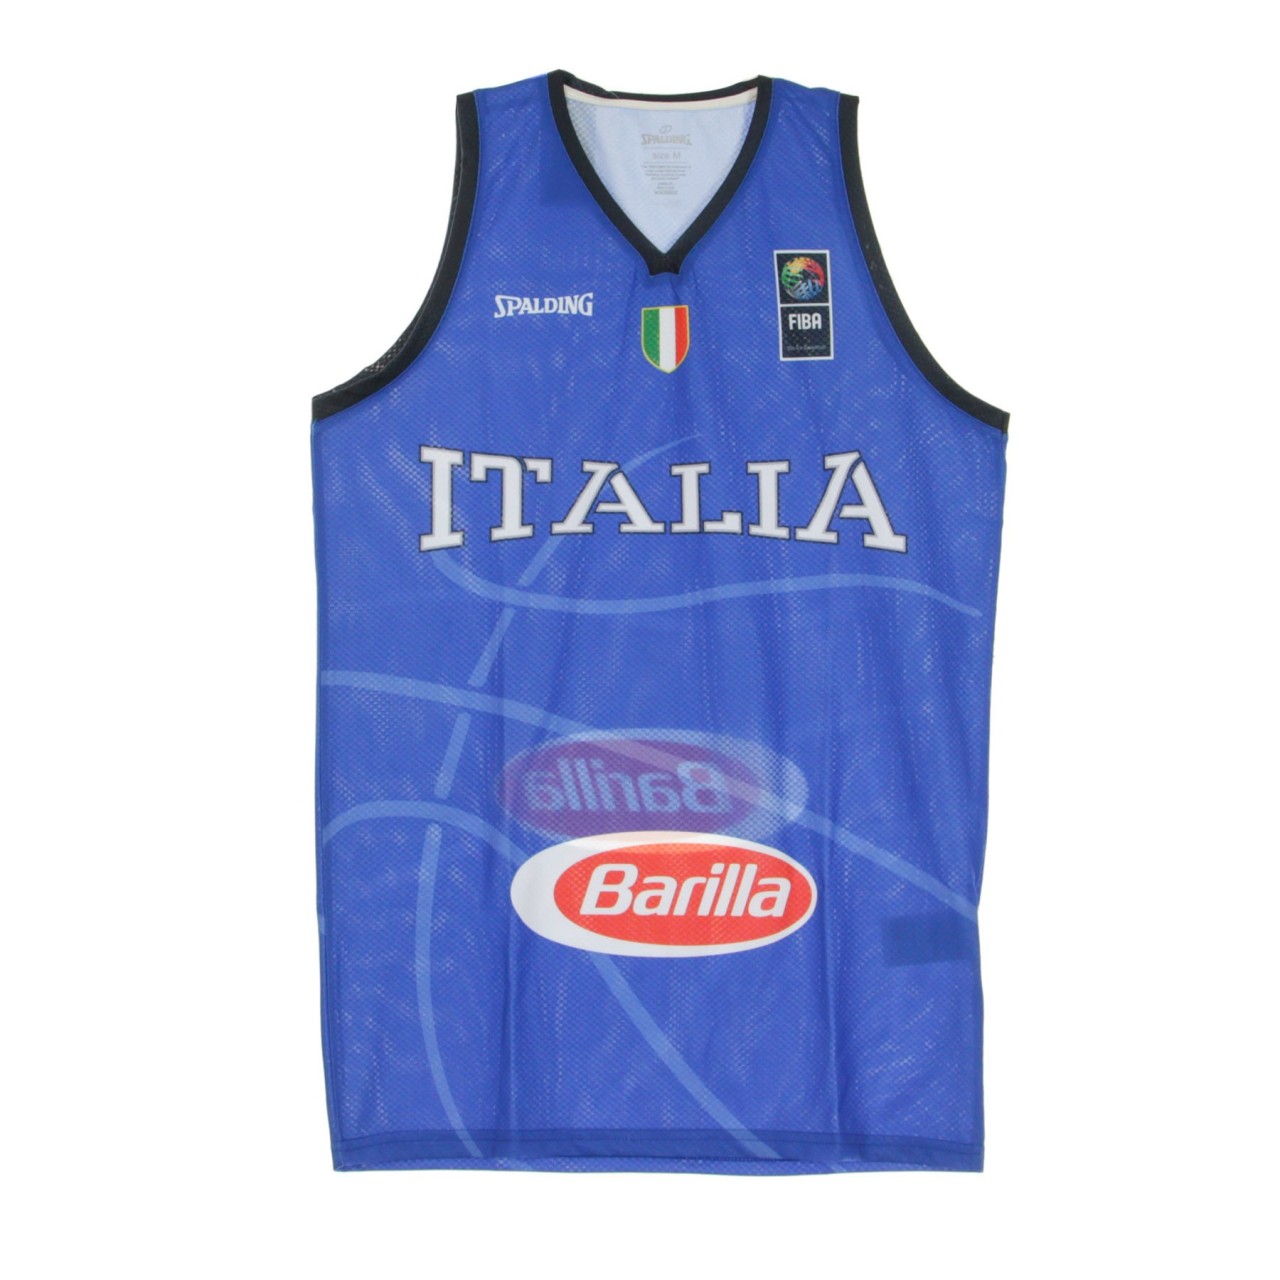 SPALDING OFFICIAL JERSEY ITALIA SP03001000IT